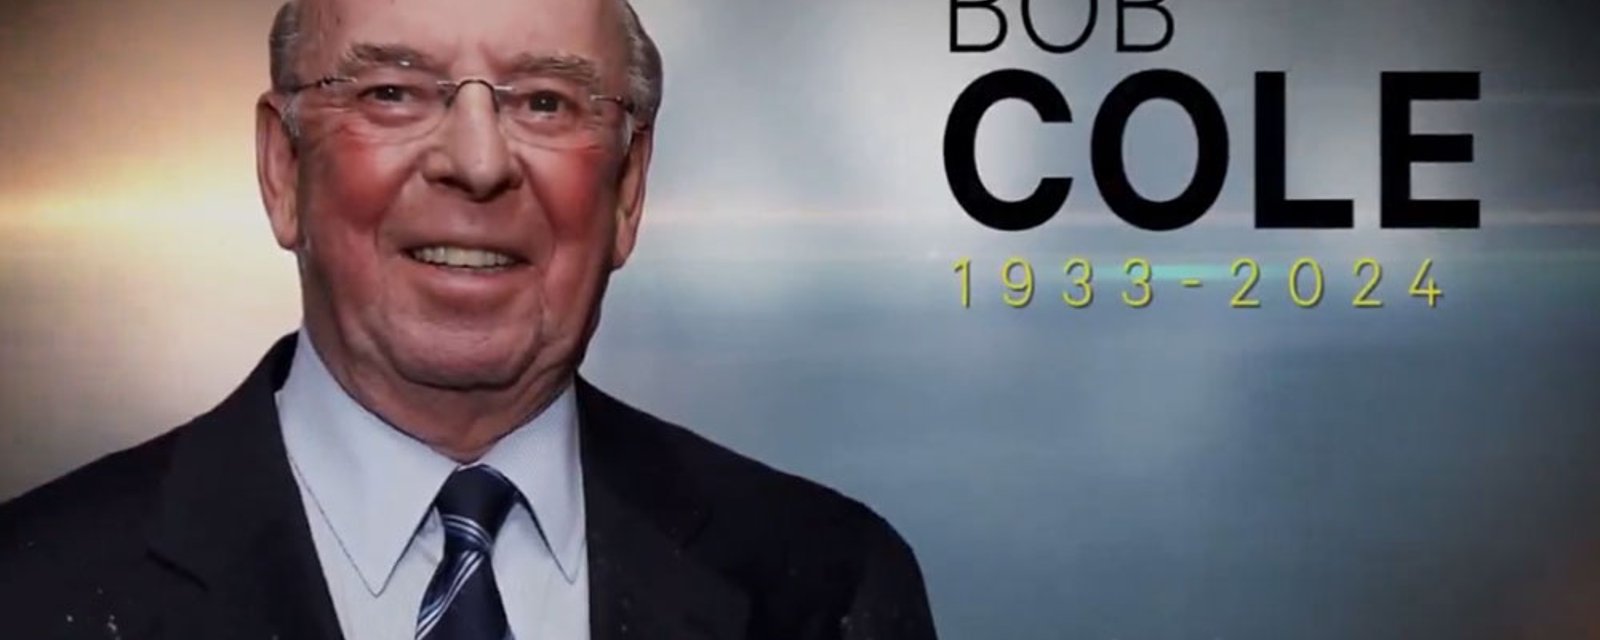 Sportsnet with a beautiful tribute to the late Bob Cole